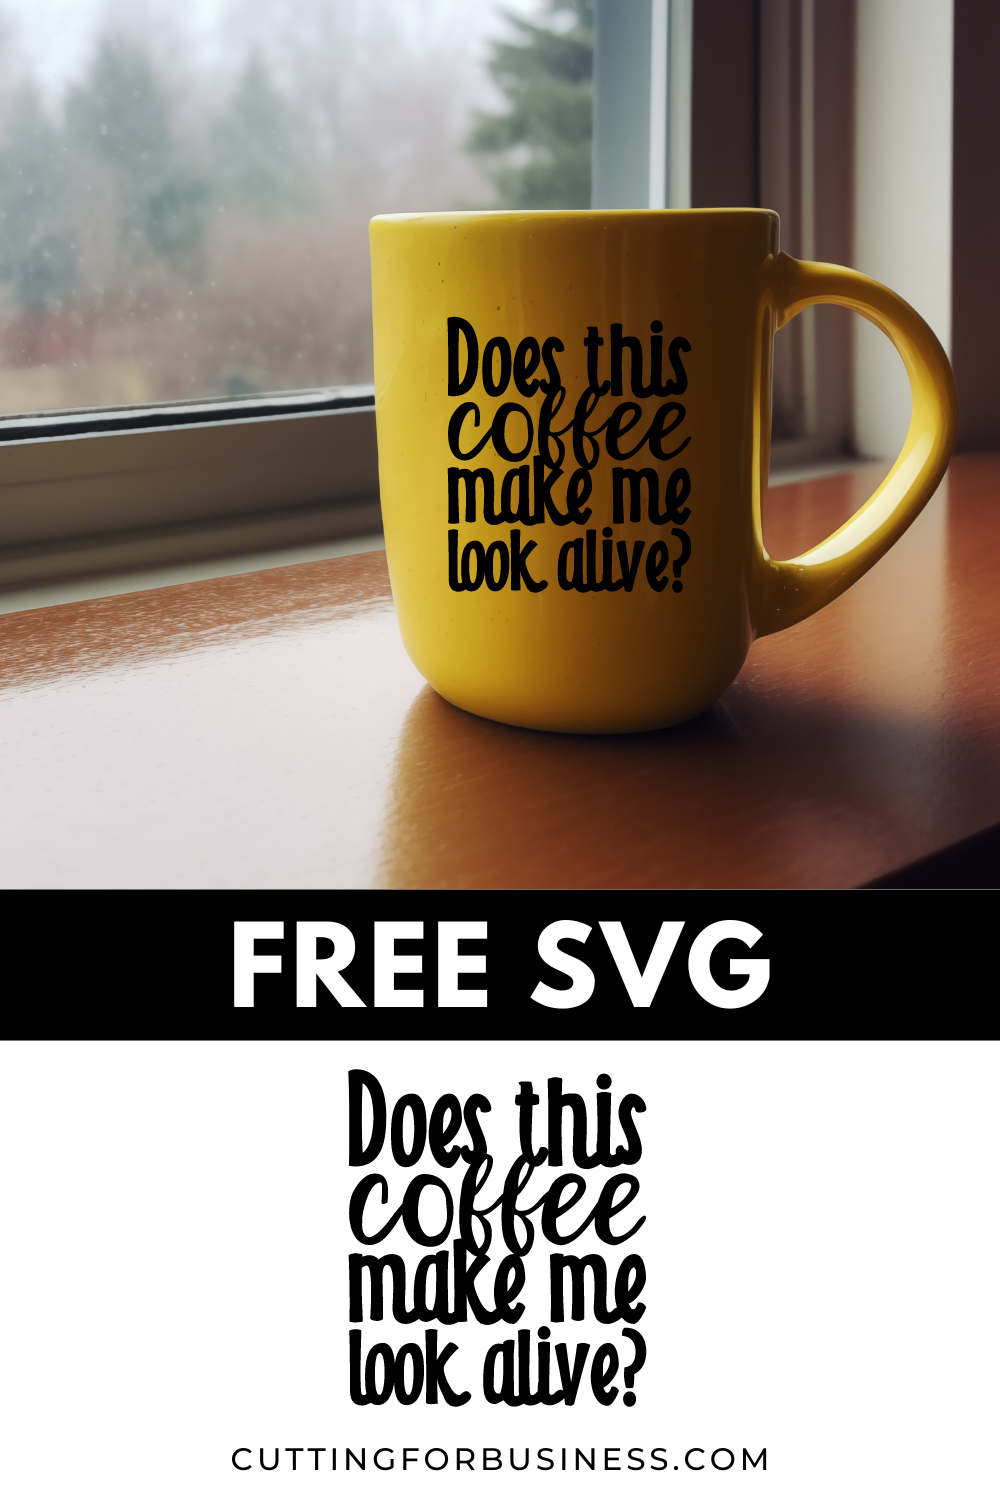 Free Coffee SVG - Does This Coffee Make Me Look Alive? - cuttingforbusiness.com